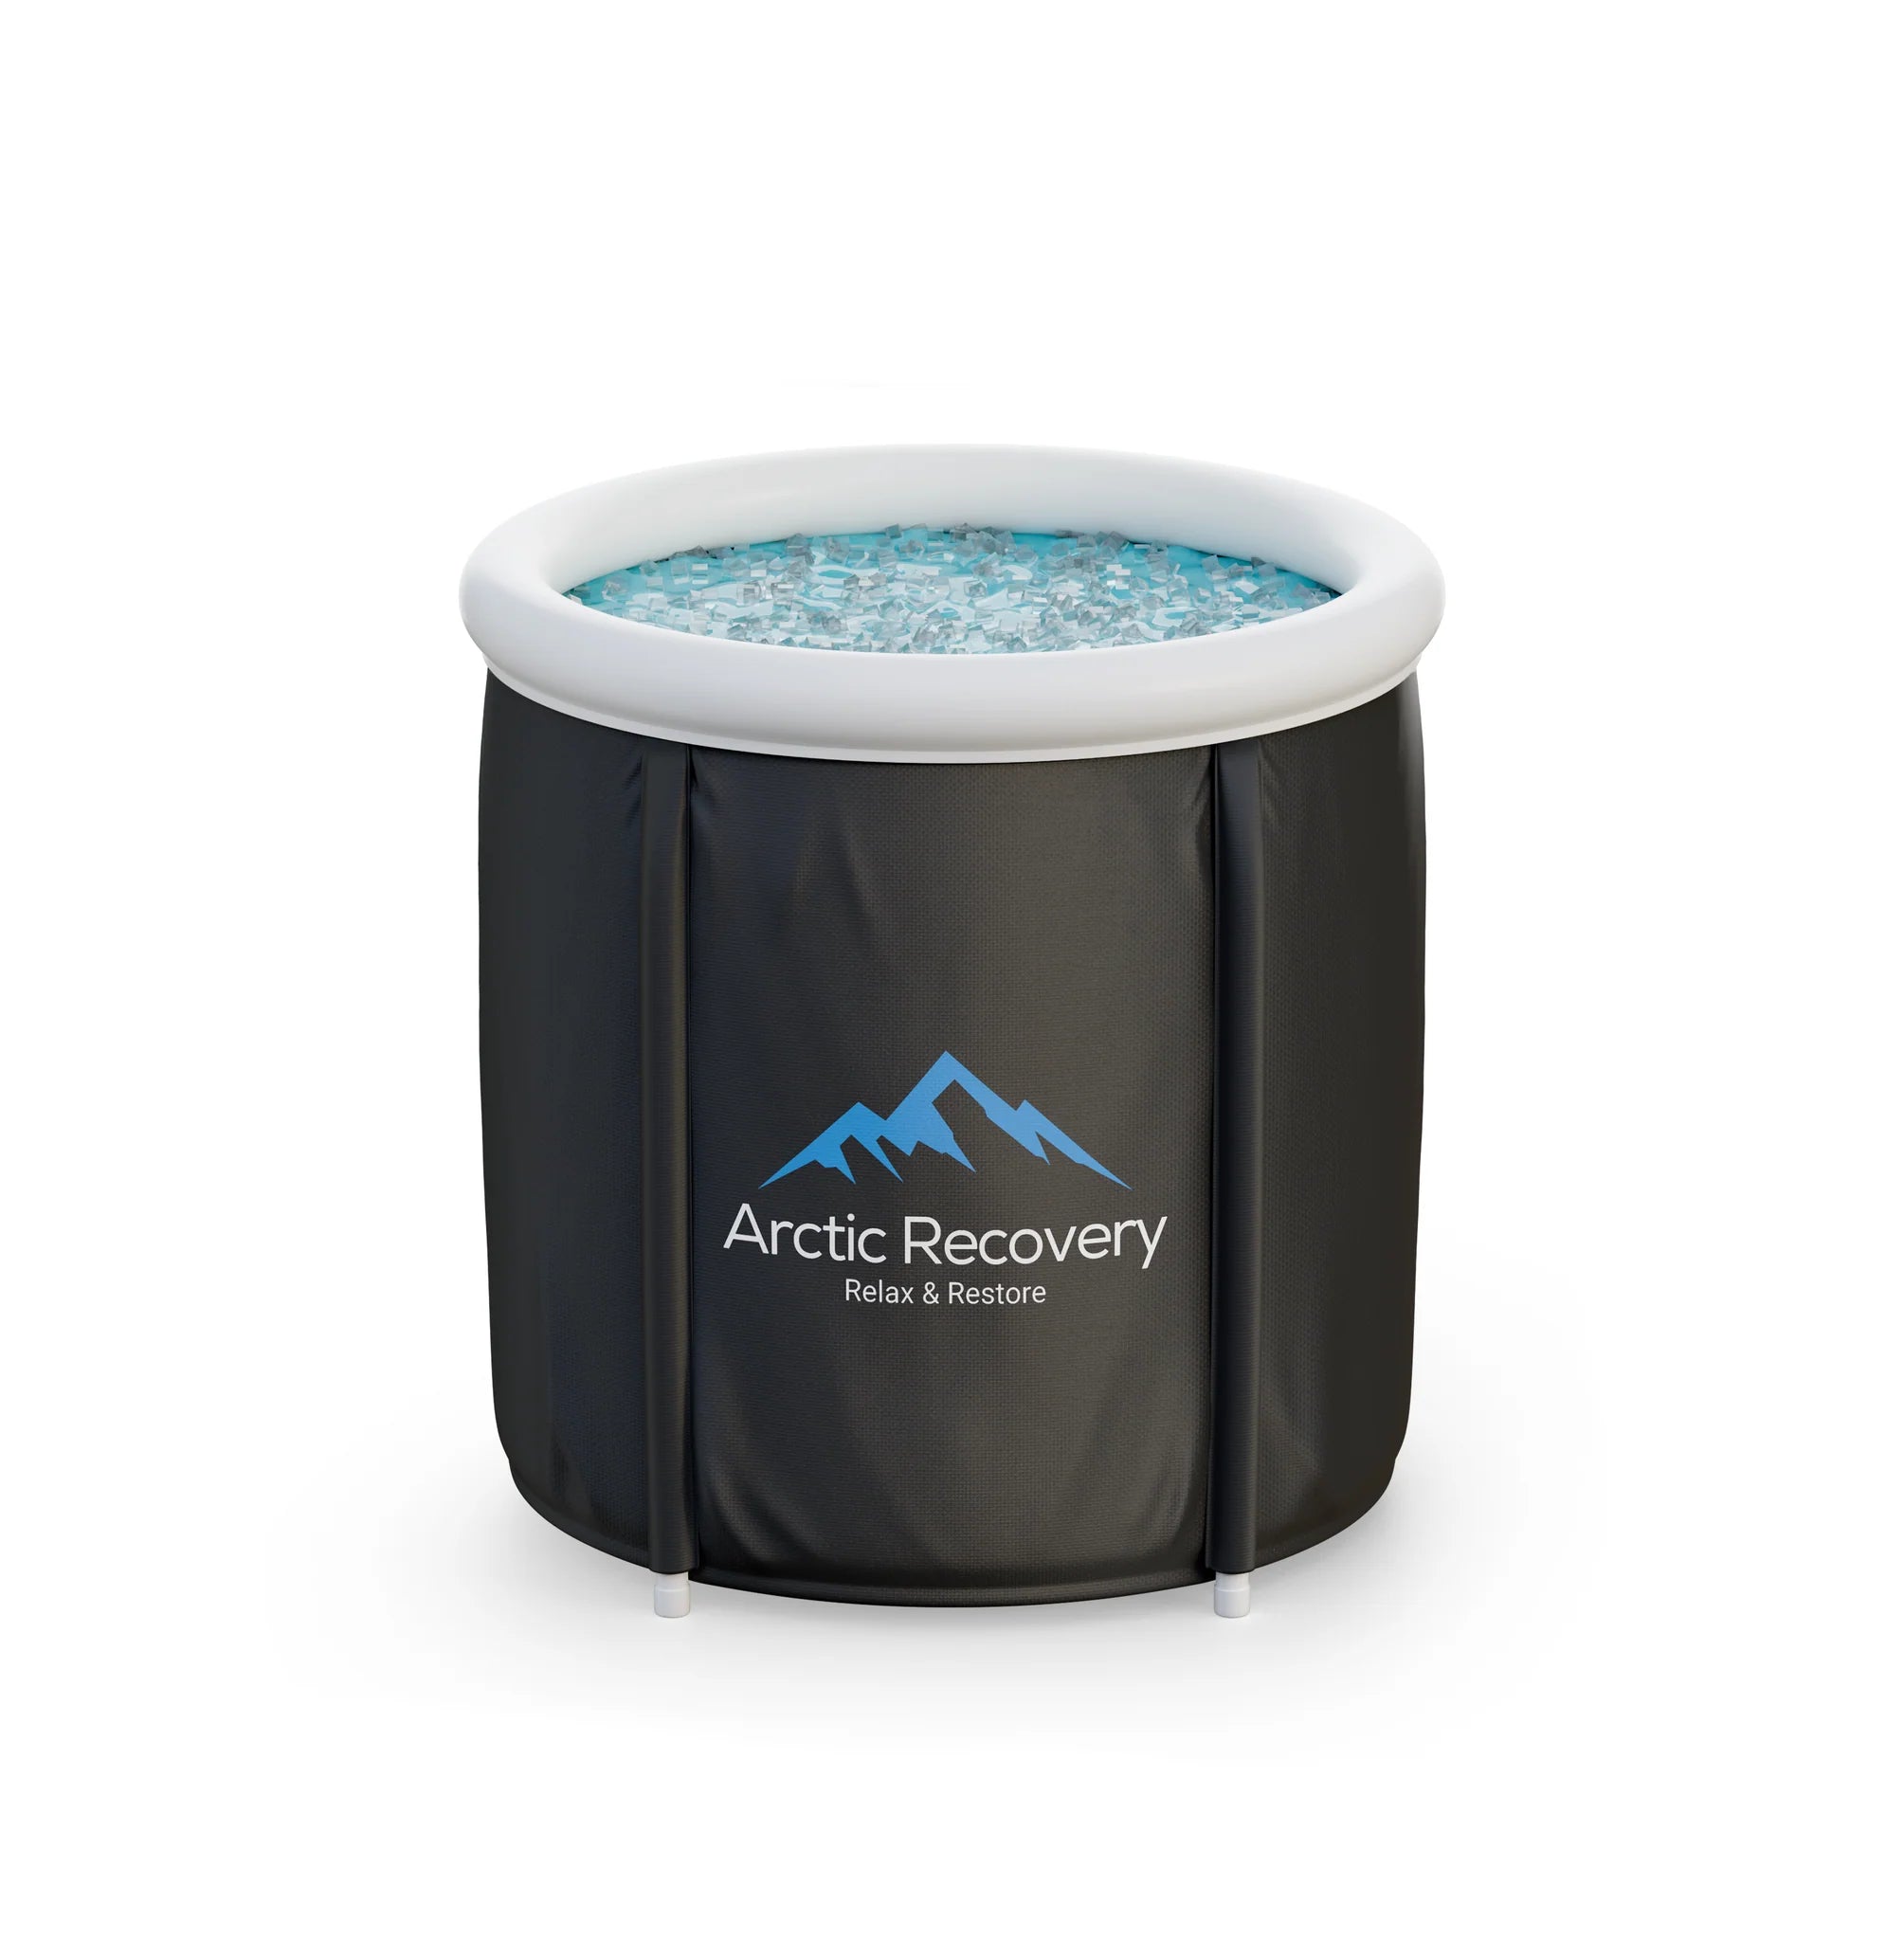 Arctic Recovery Eisbad - Angebot 2er-Pack.